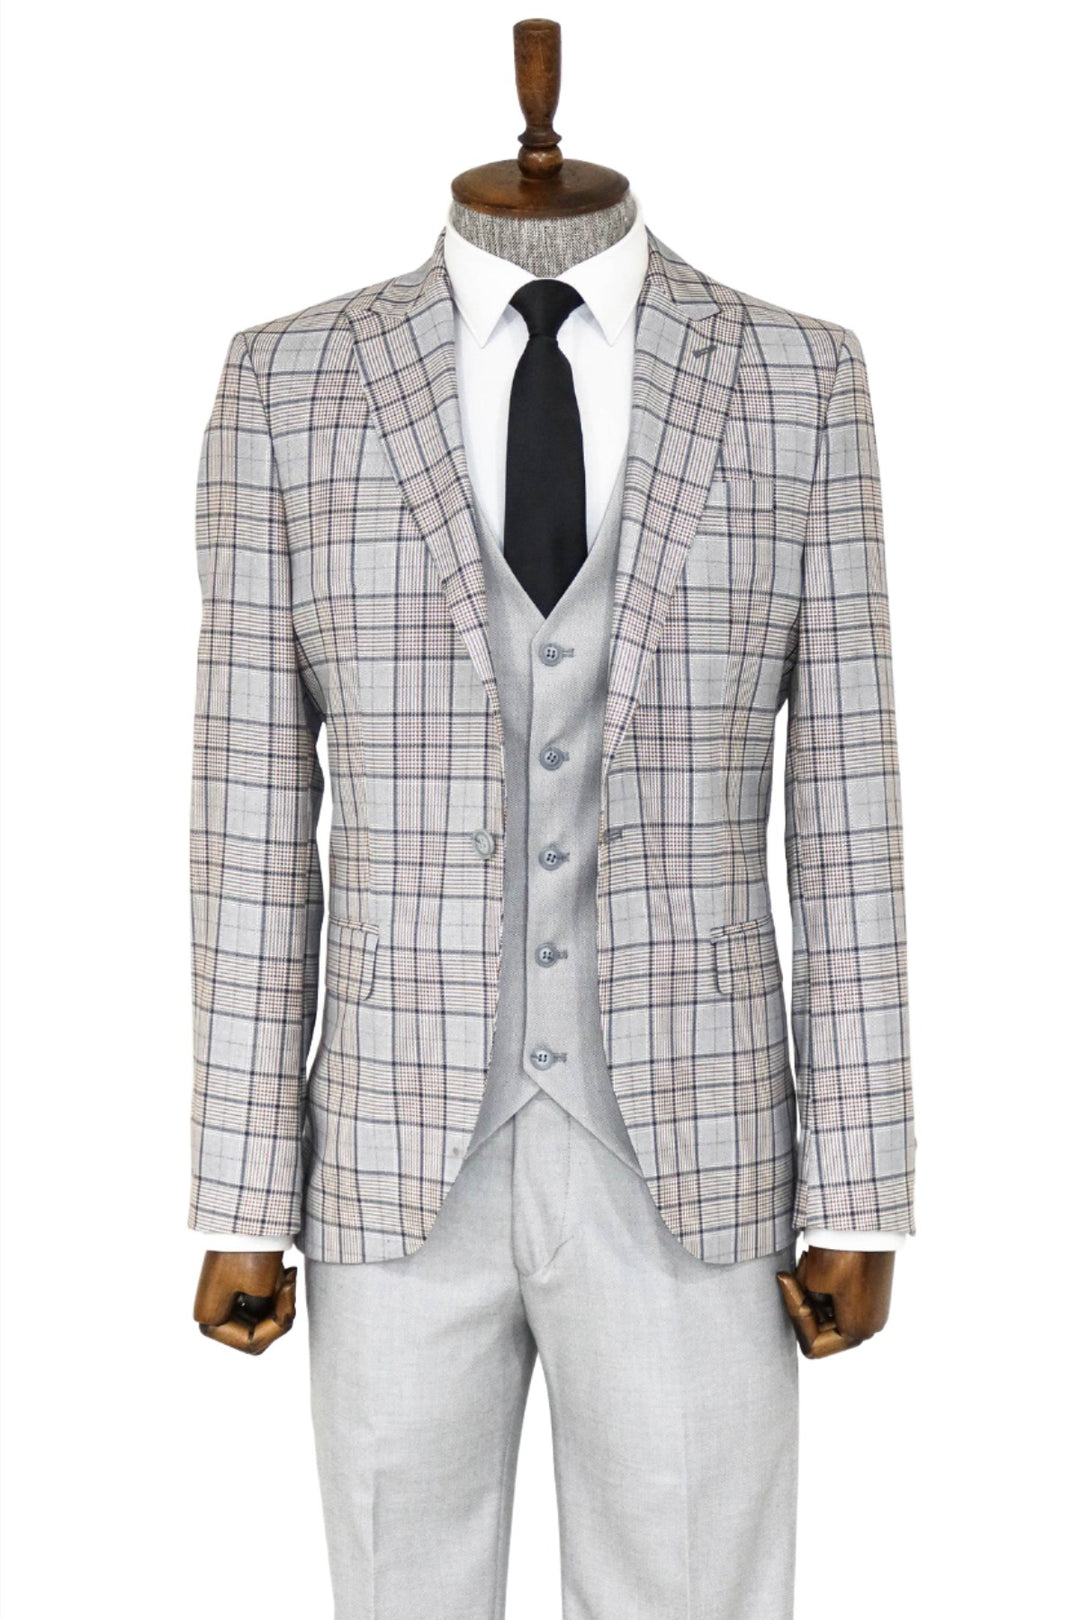 Checked Slim Fit Light Grey Men Suit and Shirt Combination - Wessi